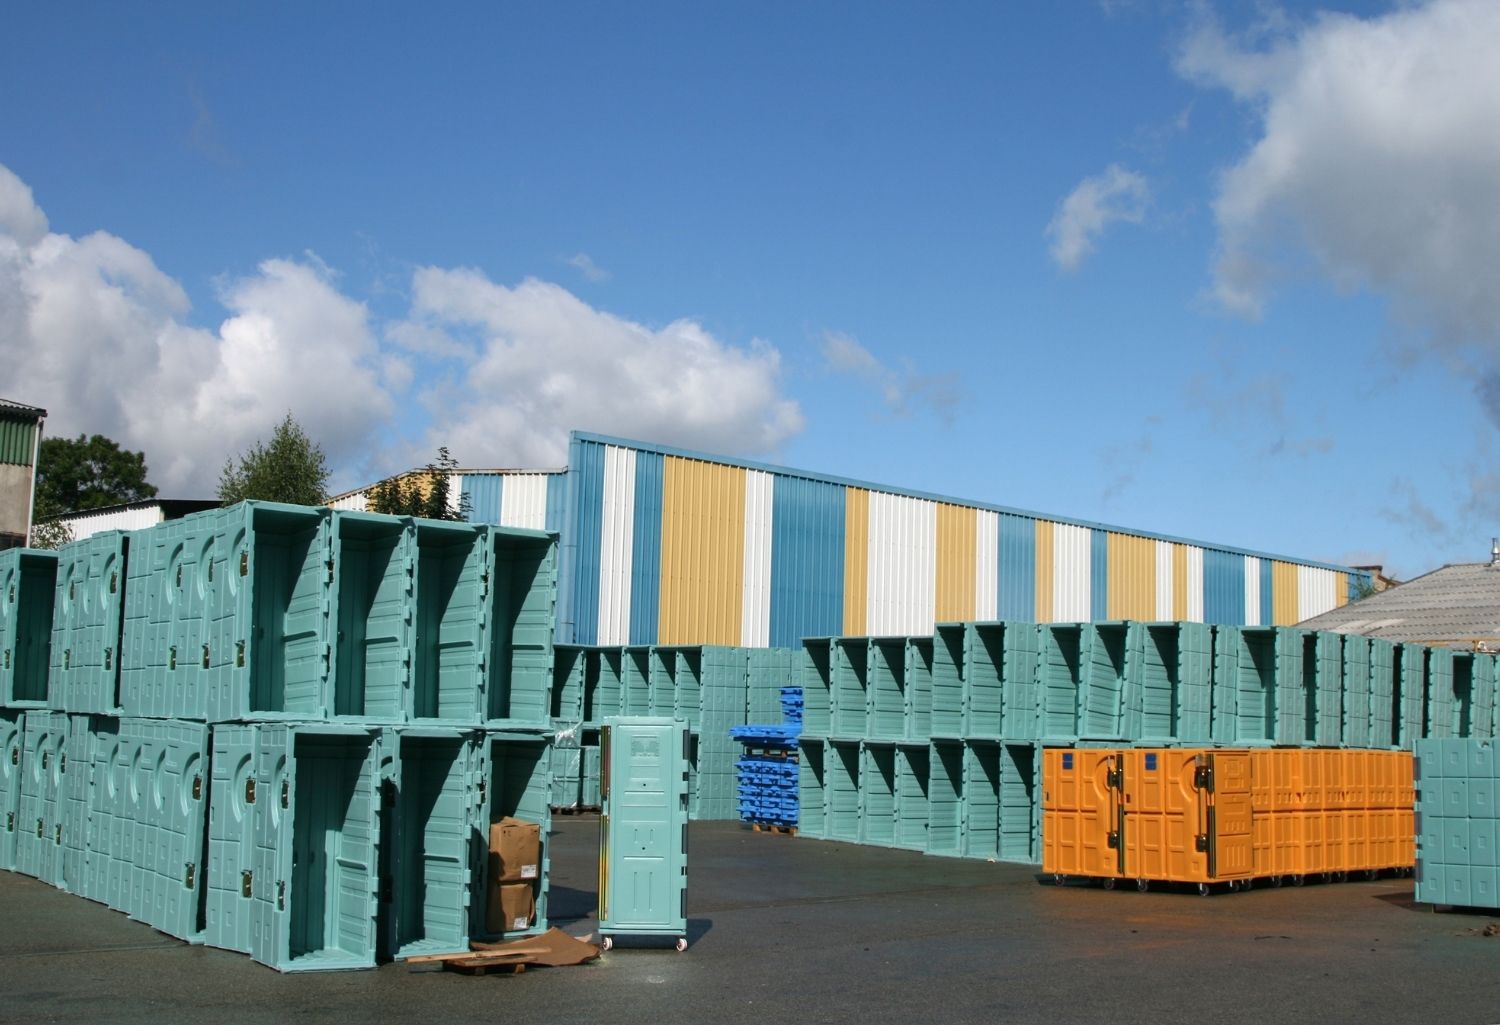 A field of open containers in front of a open blue sky with few grey clouds. Representing Collection Services in Logistics Warehousing and Distribution.